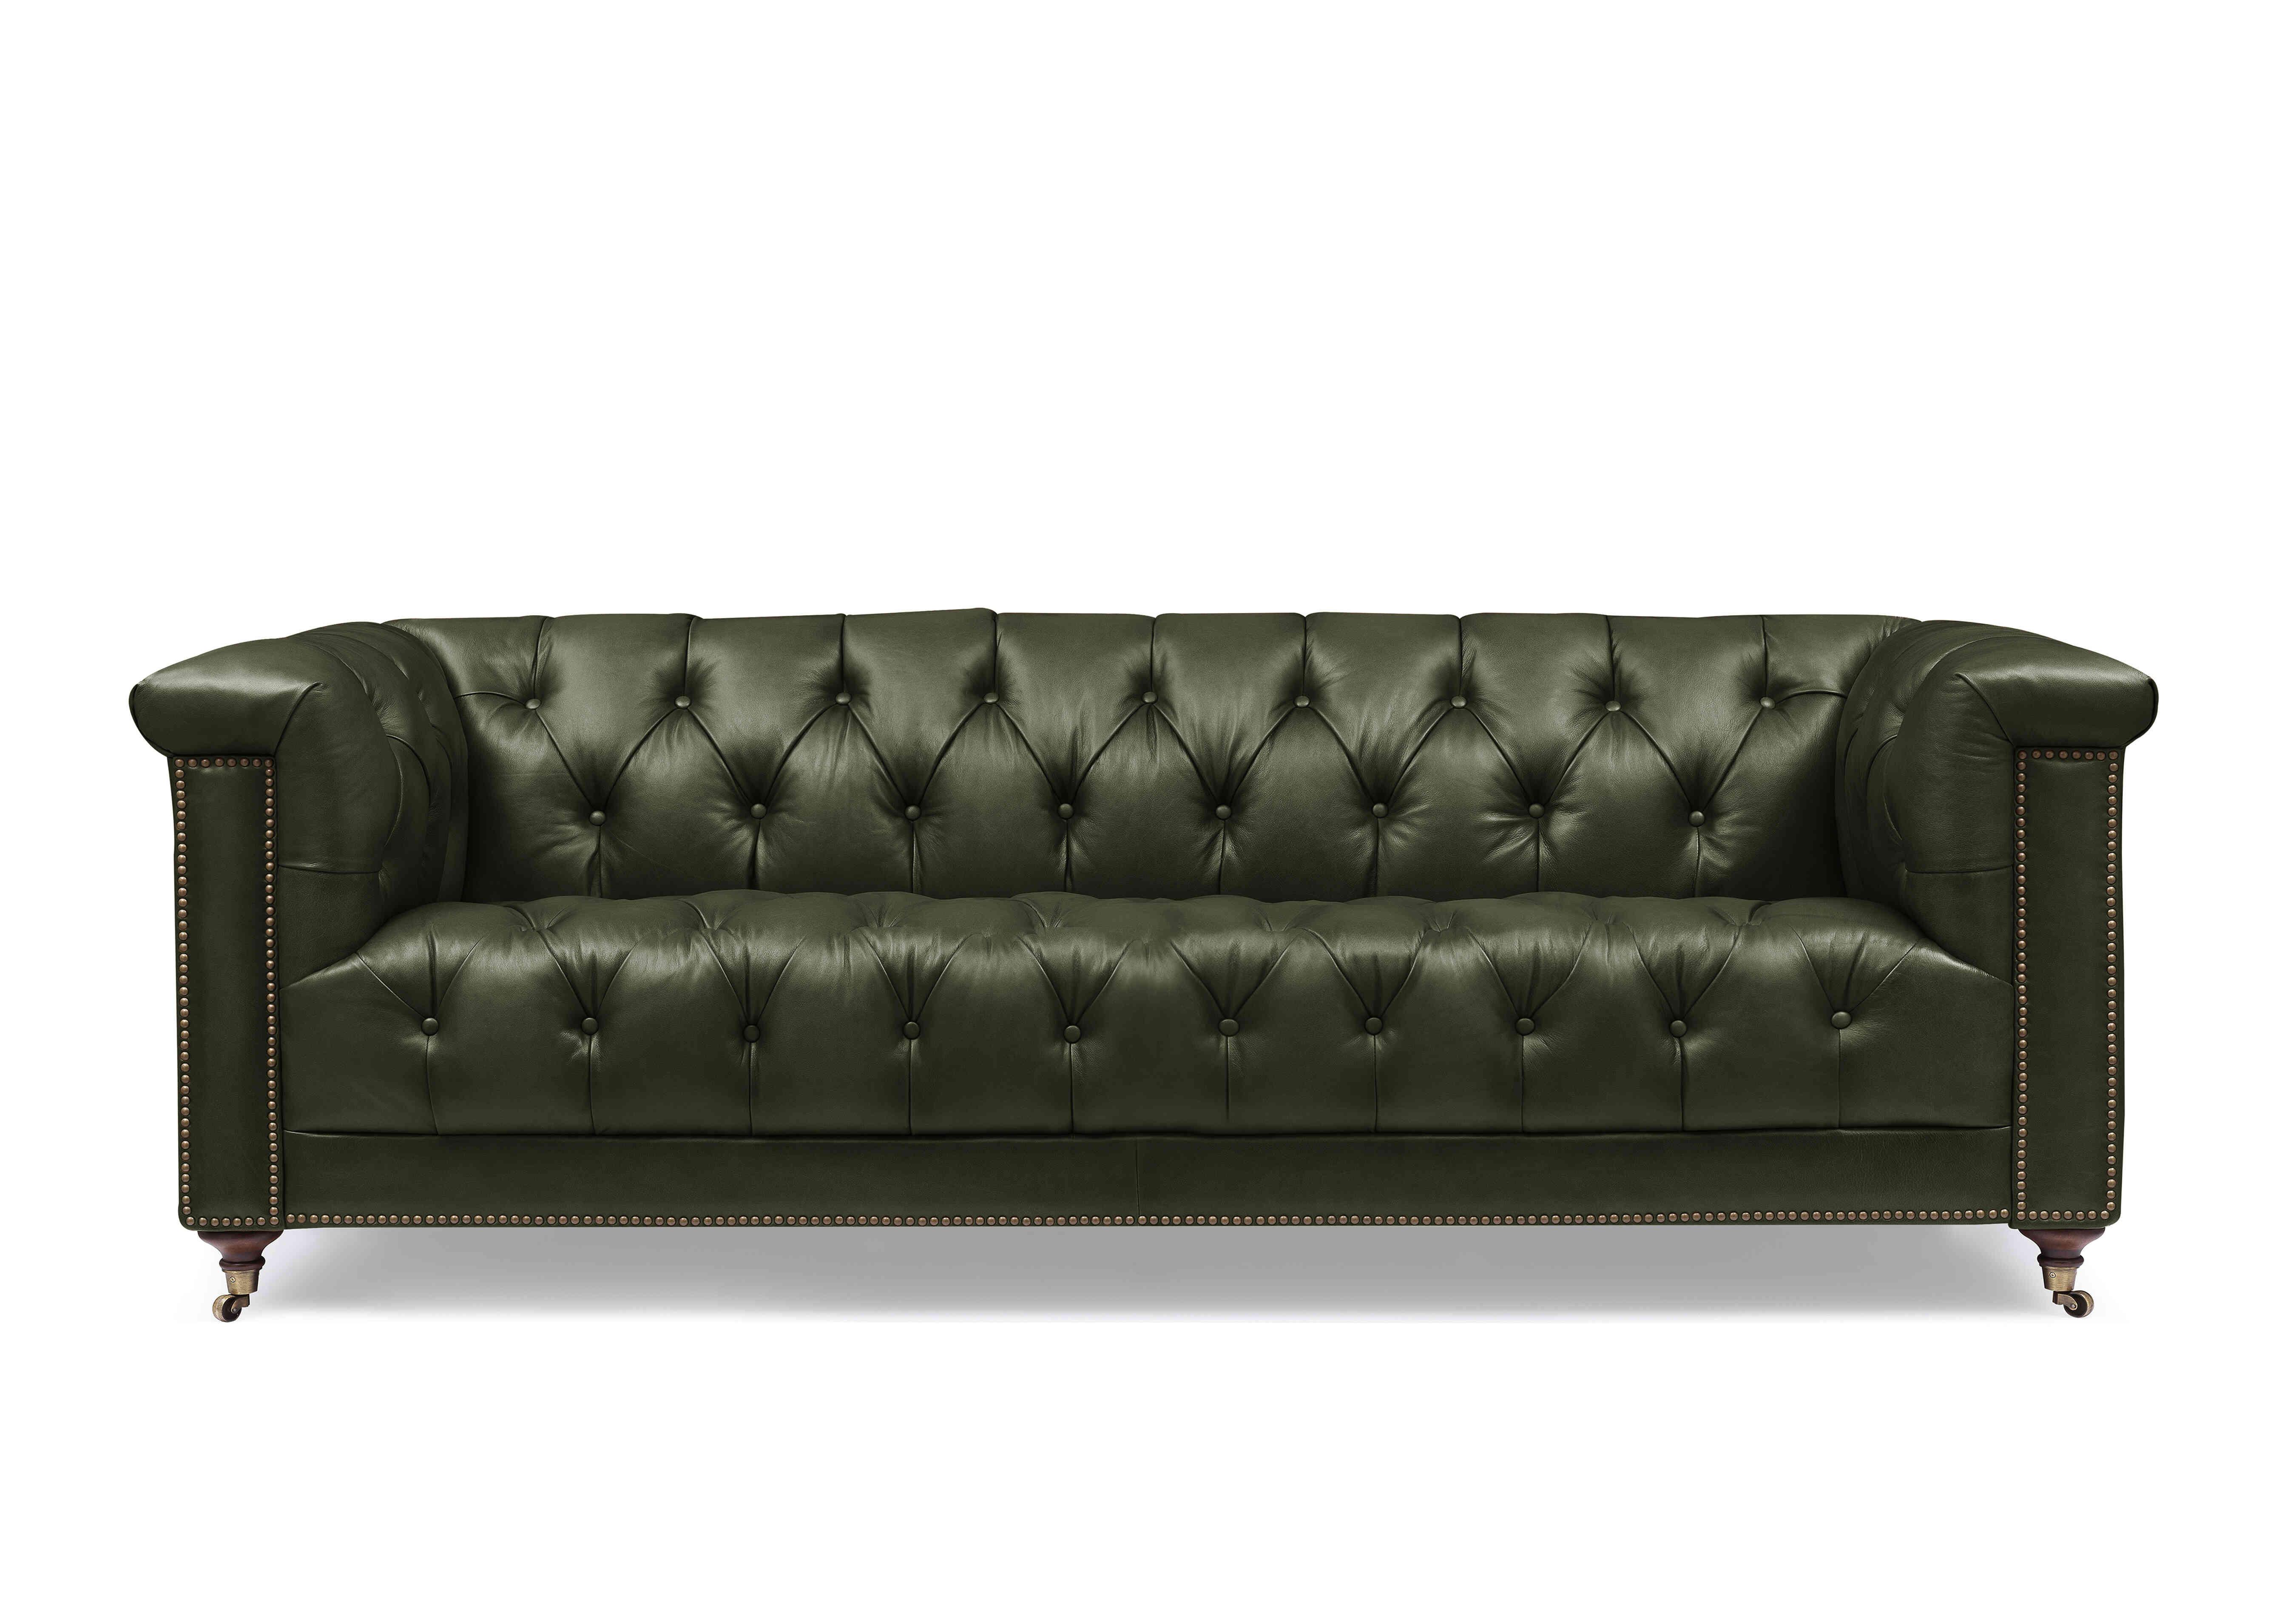 Wallace 4 Seater Leather Chesterfield Sofa in X3y1-1965ls Emerald on Furniture Village